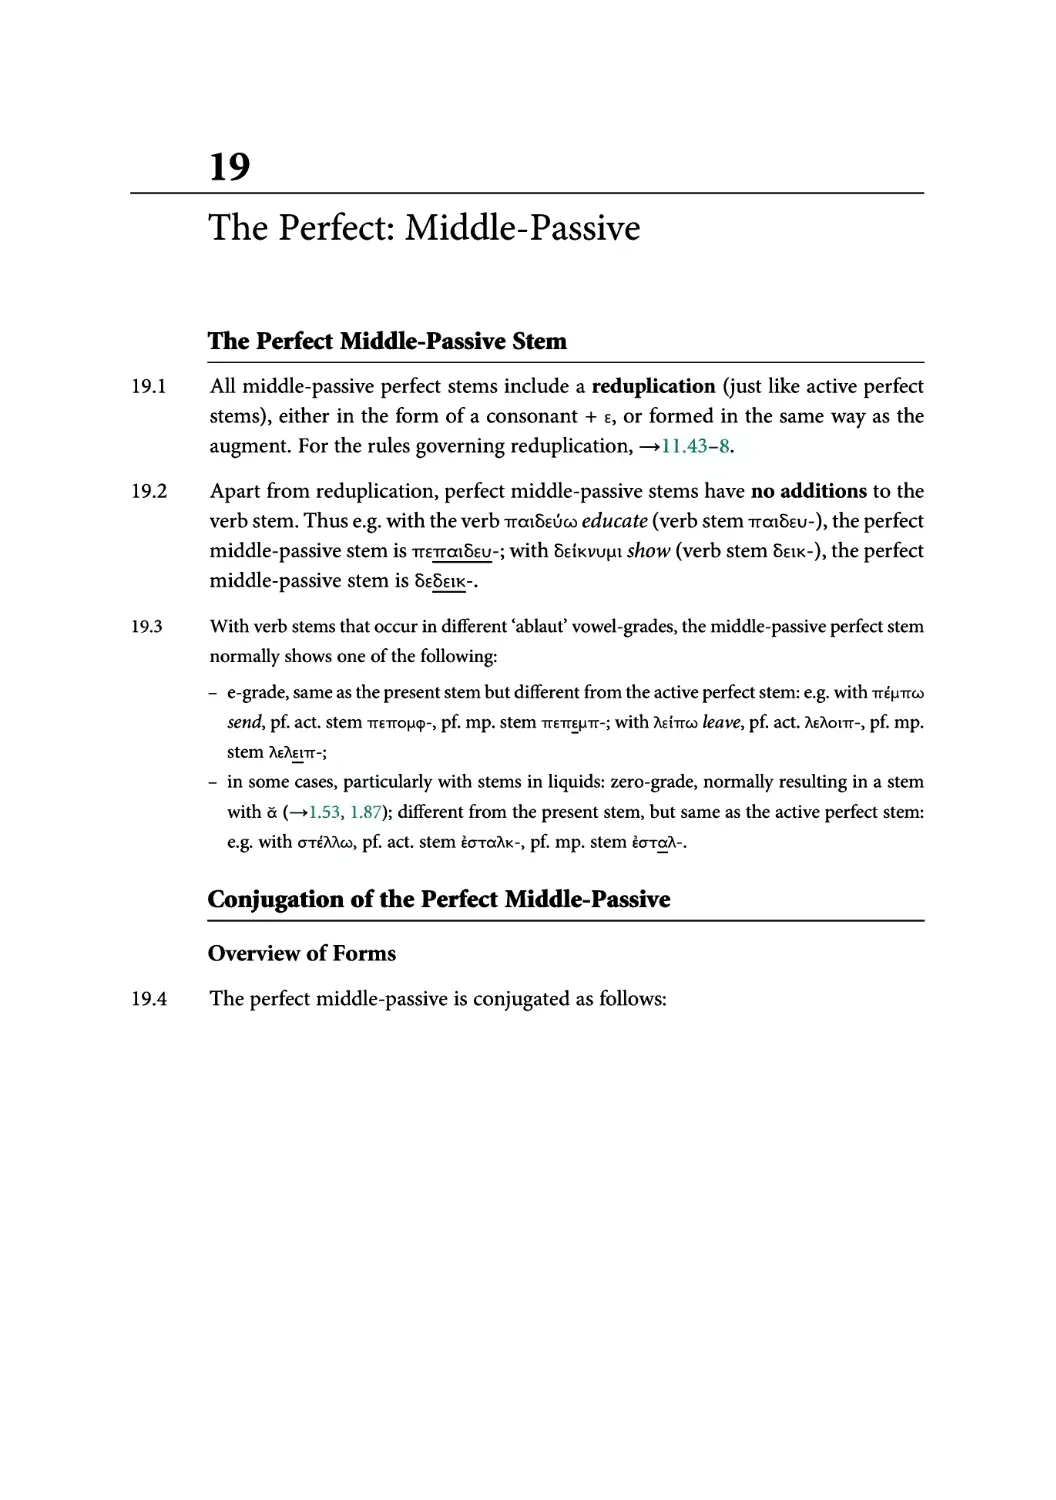 19. The Perfect: Middle-Passive